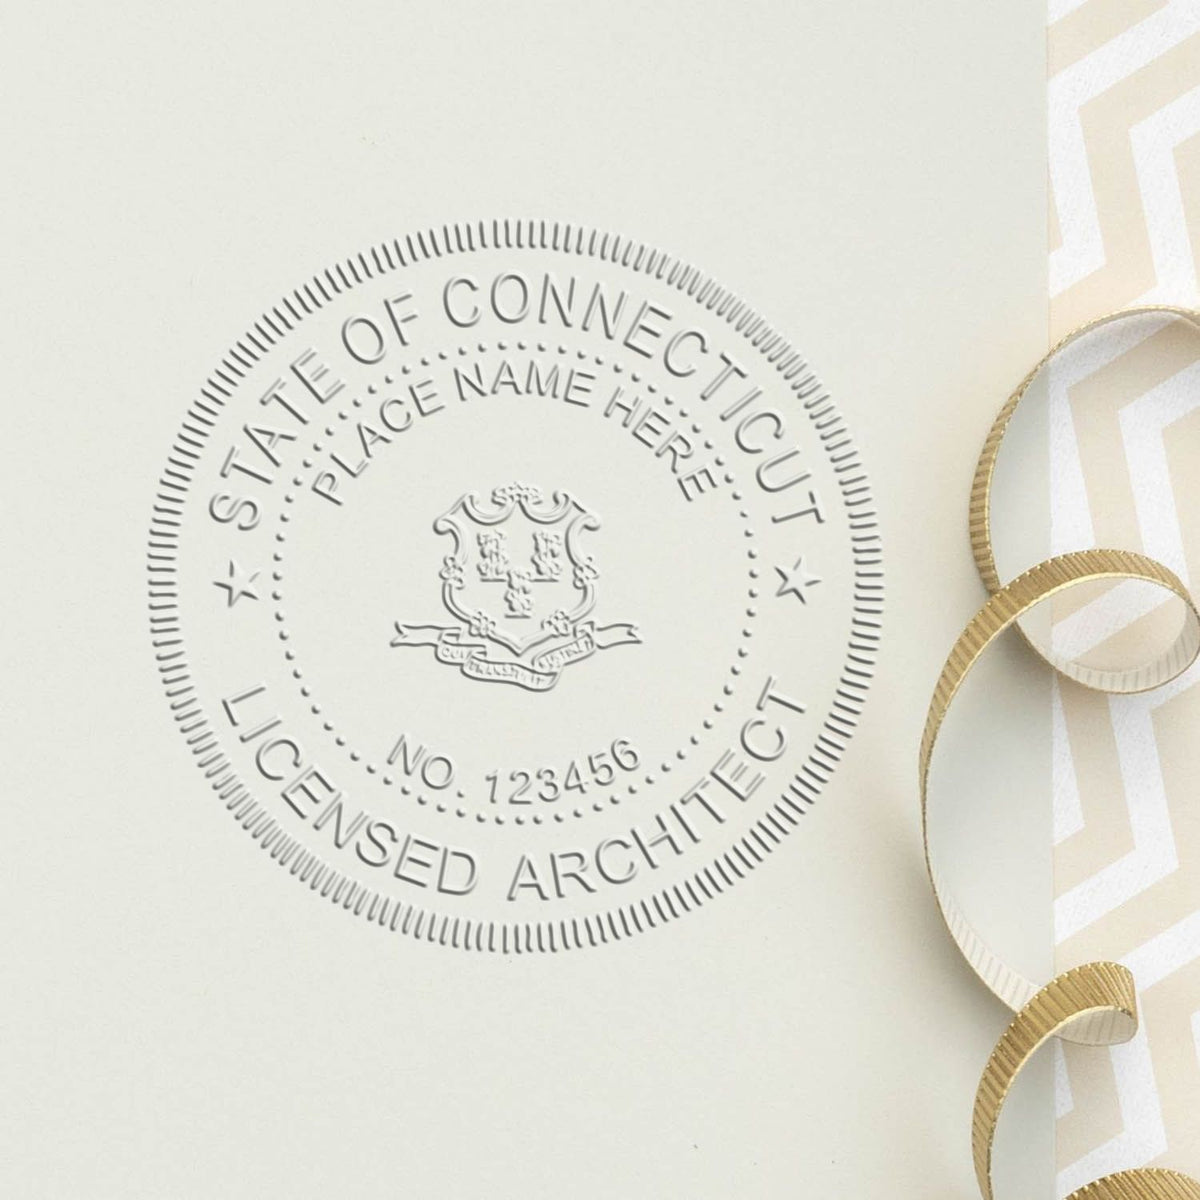 A stamped impression of the Connecticut Desk Architect Embossing Seal in this stylish lifestyle photo, setting the tone for a unique and personalized product.